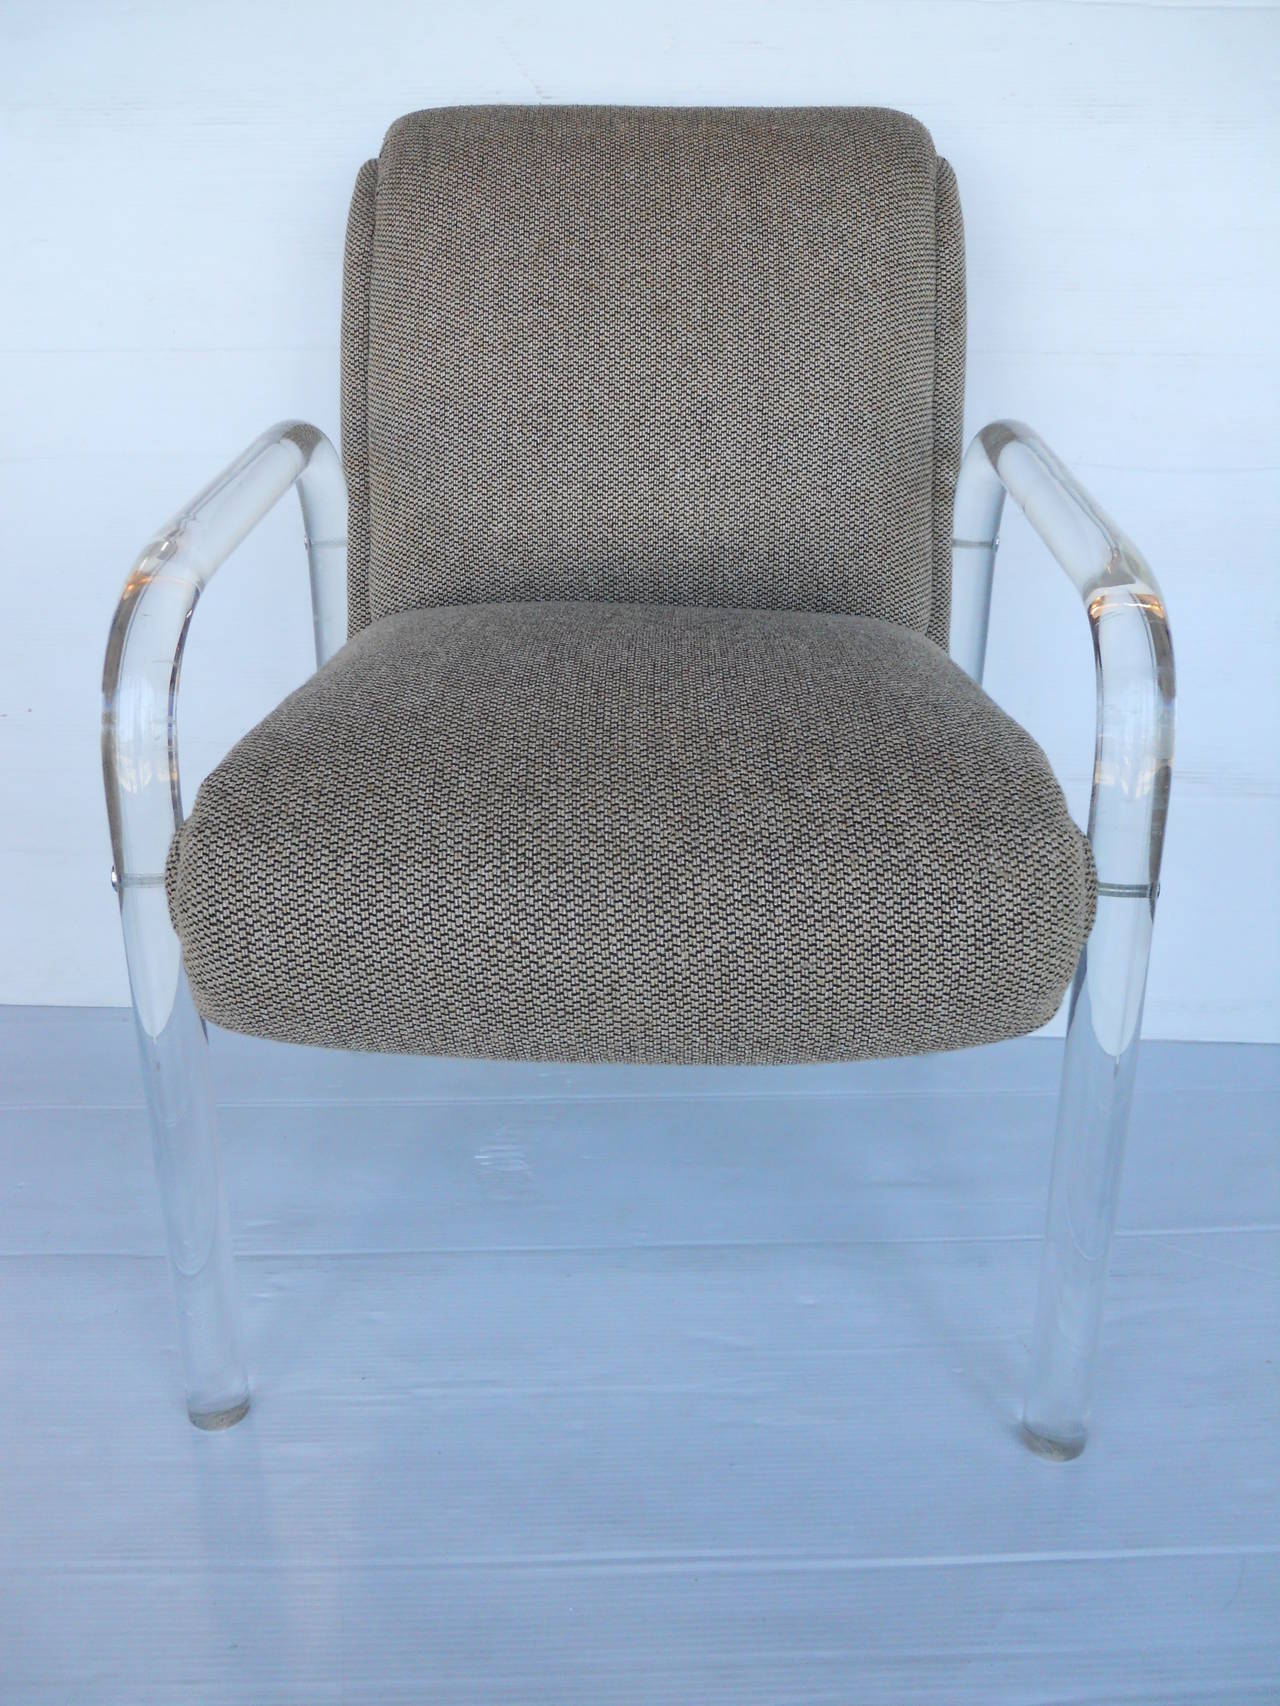 Set of four Lucite dining chairs by Lion in Frost
Lucite and woven fabric
seat depth 19